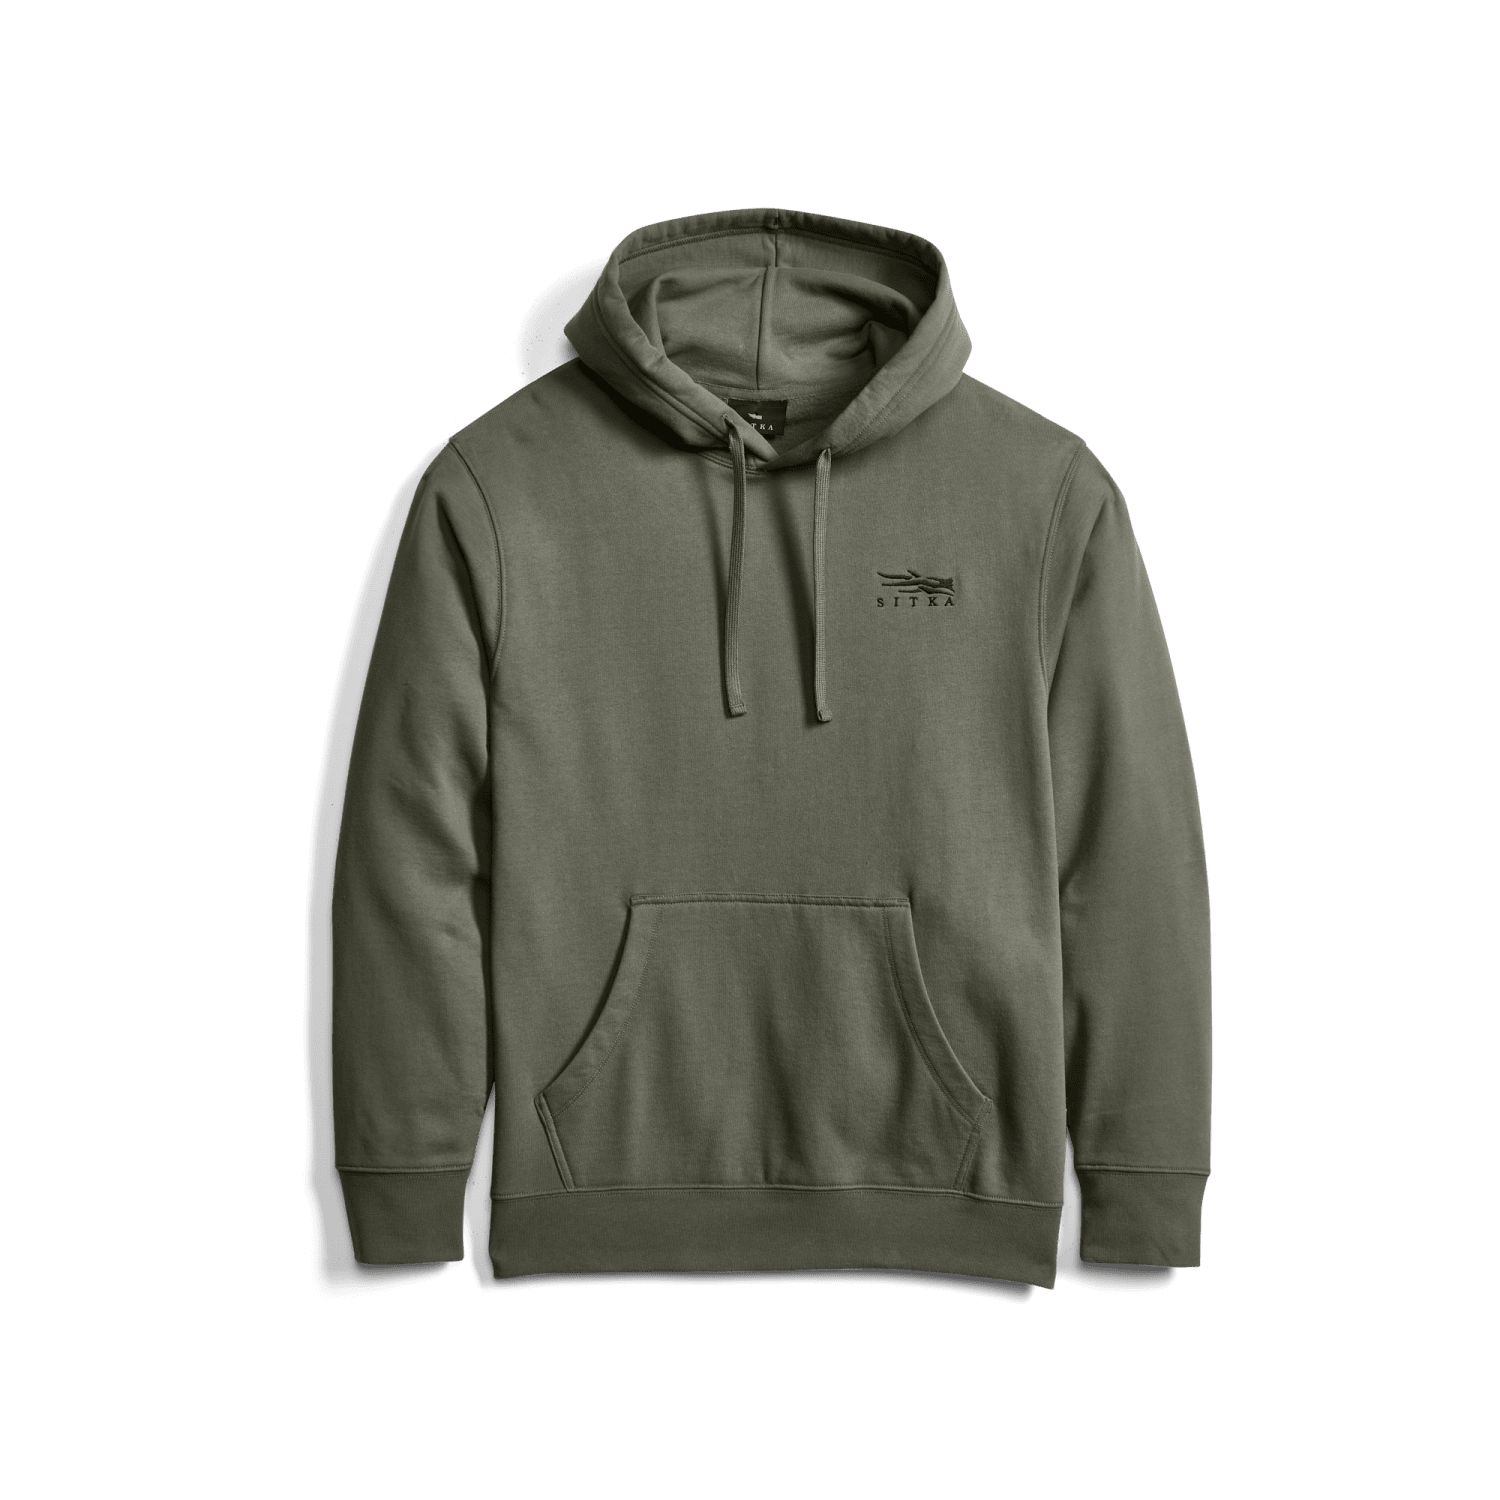 SIGMA 50: The Epic EDC Hoodie with Secret Pockets by Spindle